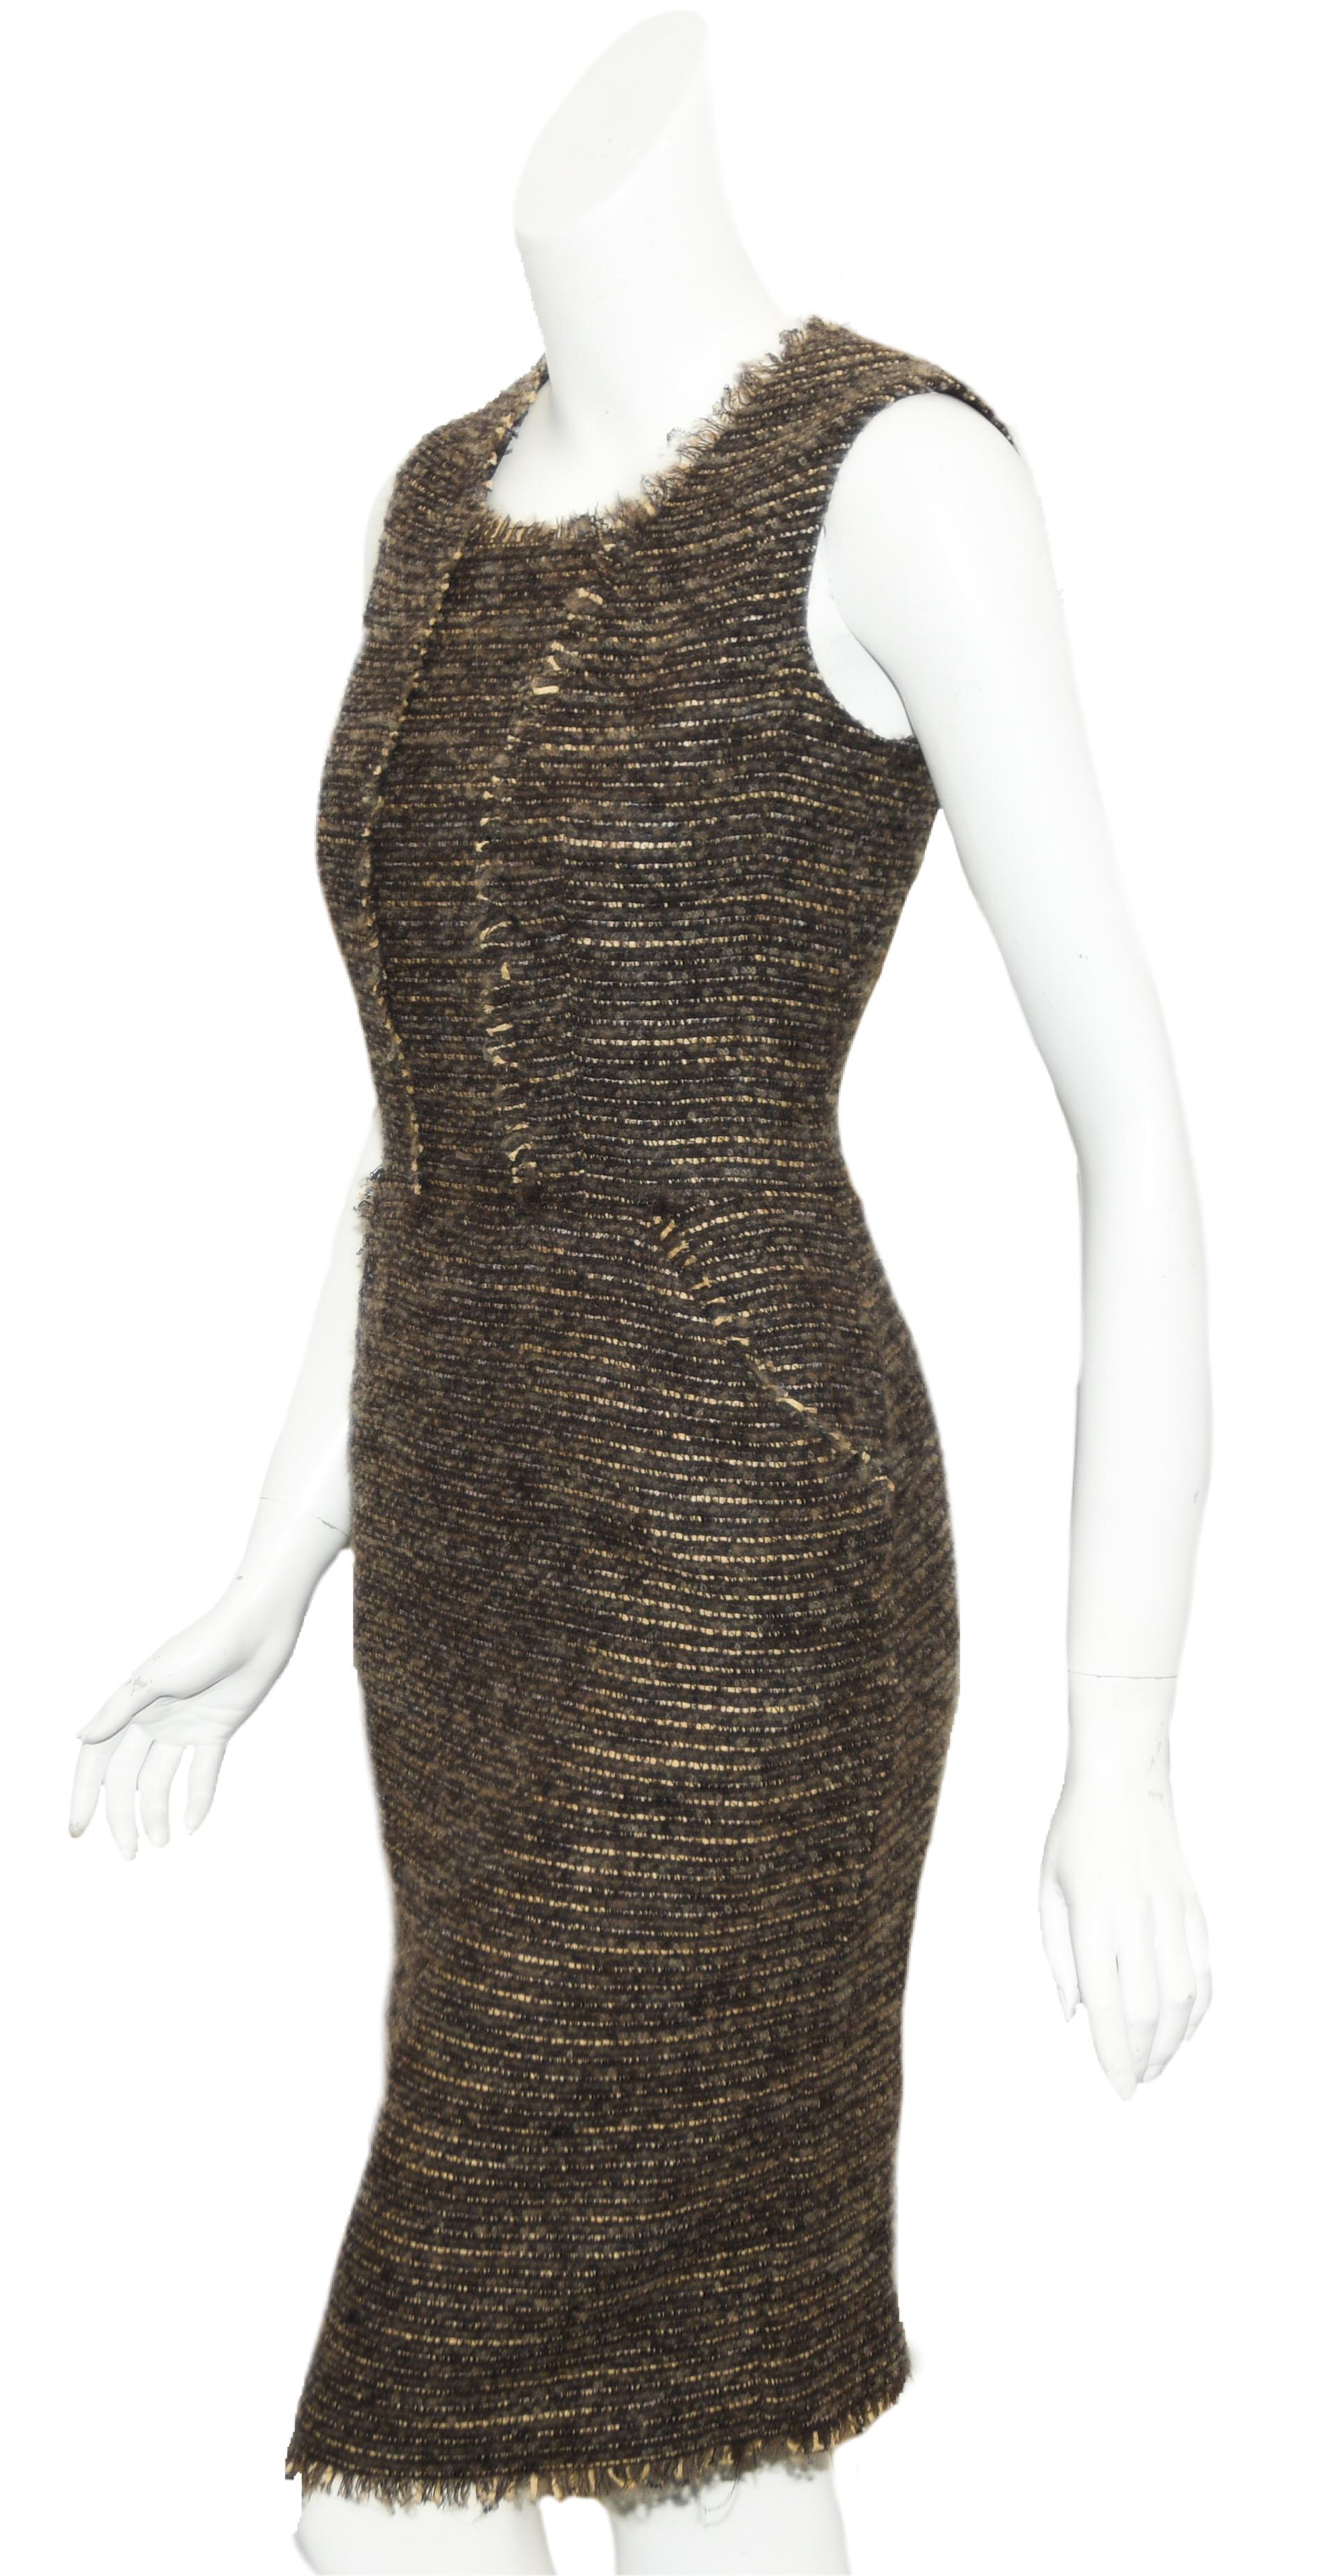 Oscar de la Renta wool tweed boucle sleeveless dress in brown and beige tones is from 2009 Fall.  This classic sheath dress features square neckline that is defined with fringe trim, that continues down the front and accentuates the two slit pockets